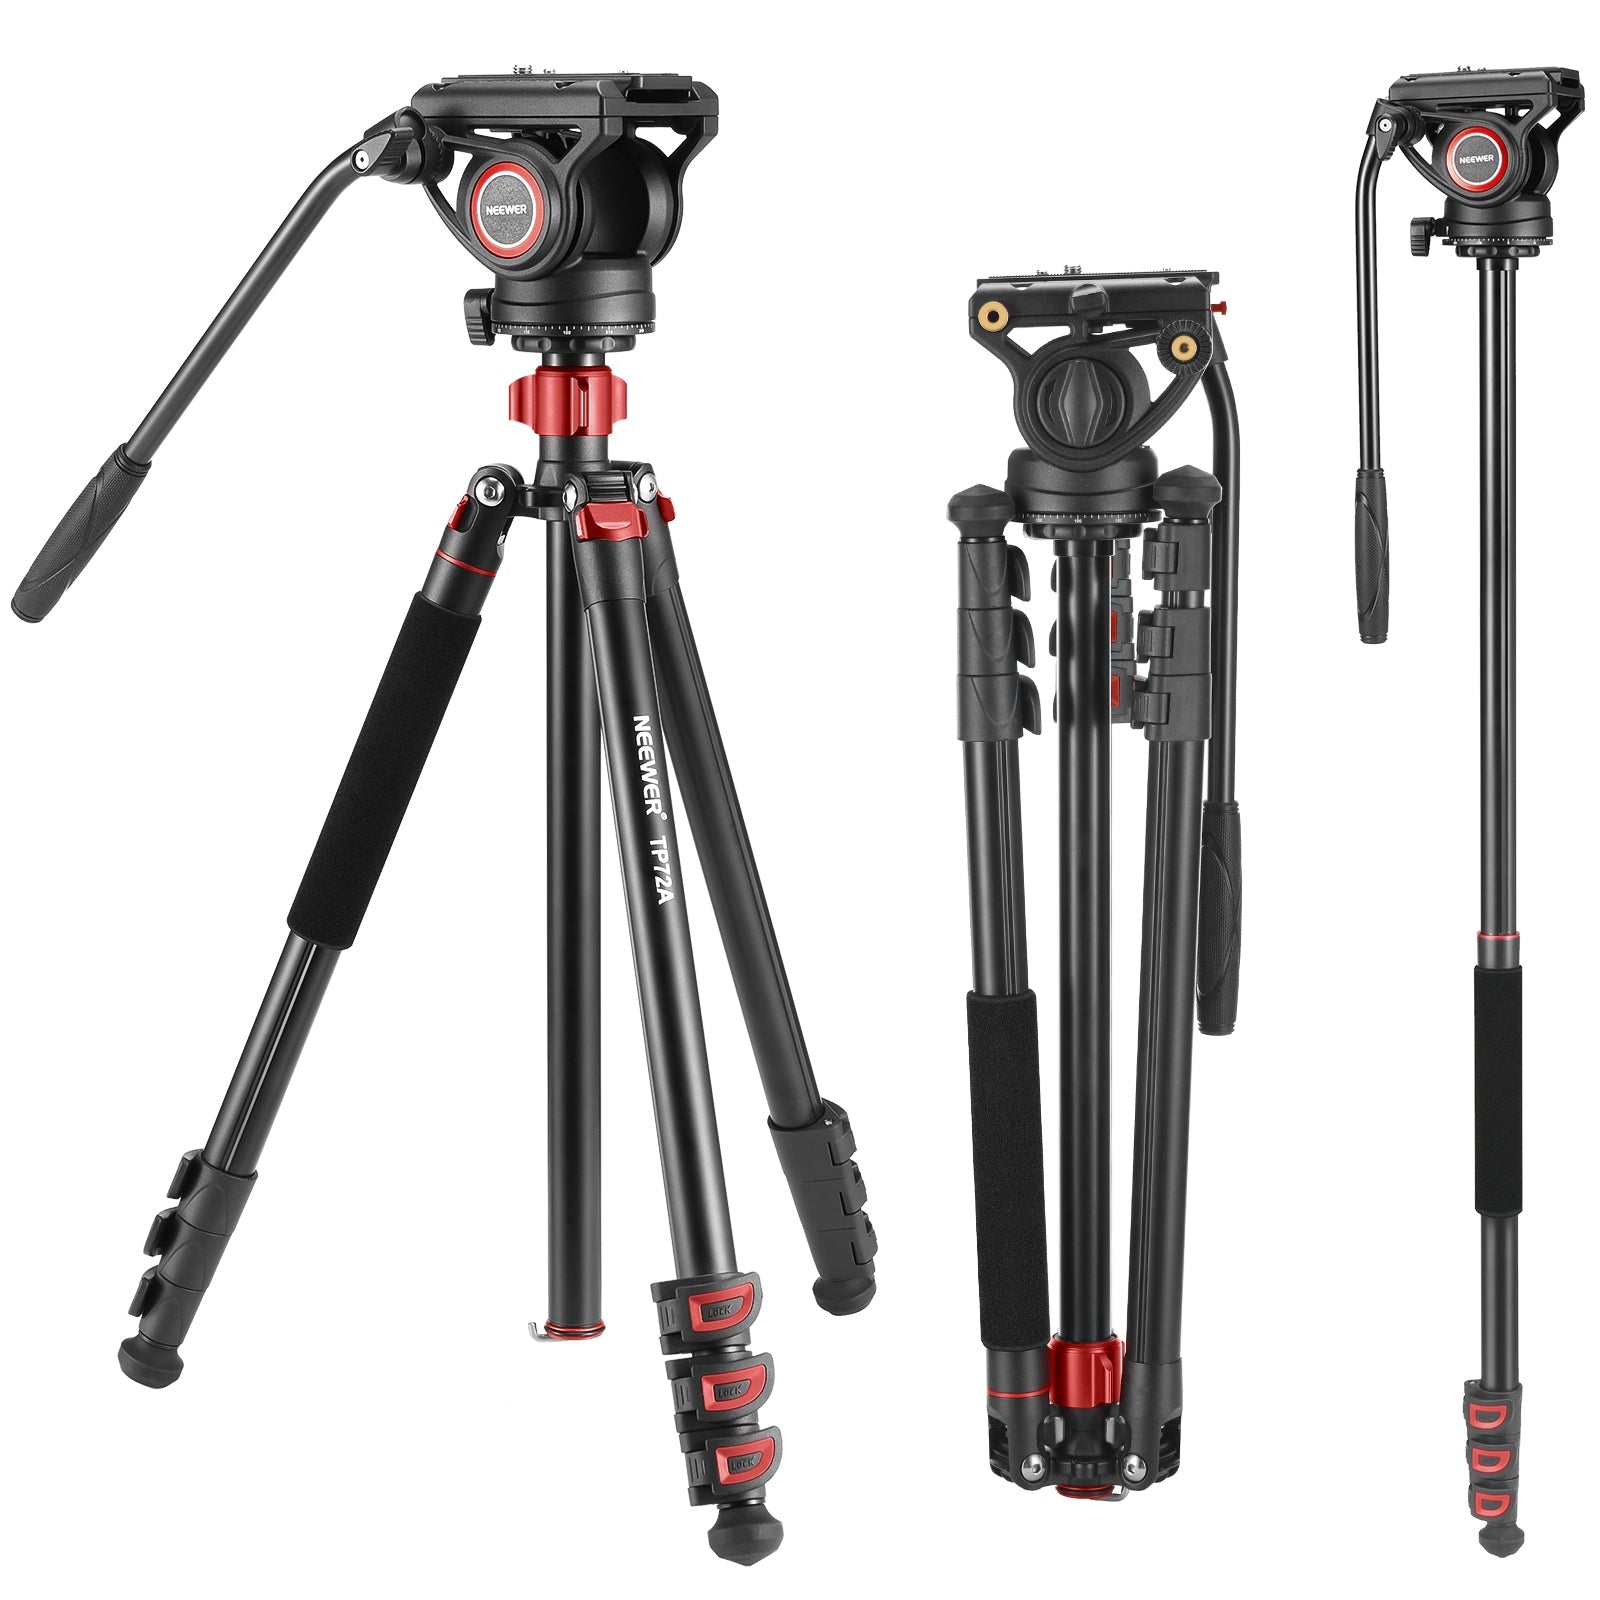 NEEWER 74 Pro Video Tripod with Fluid Head, Heavy Duty Aluminum Tripod  with 360° Pan&-70°/+90° Tilt Head Quick Release Plate and Mid-Level  Spreader